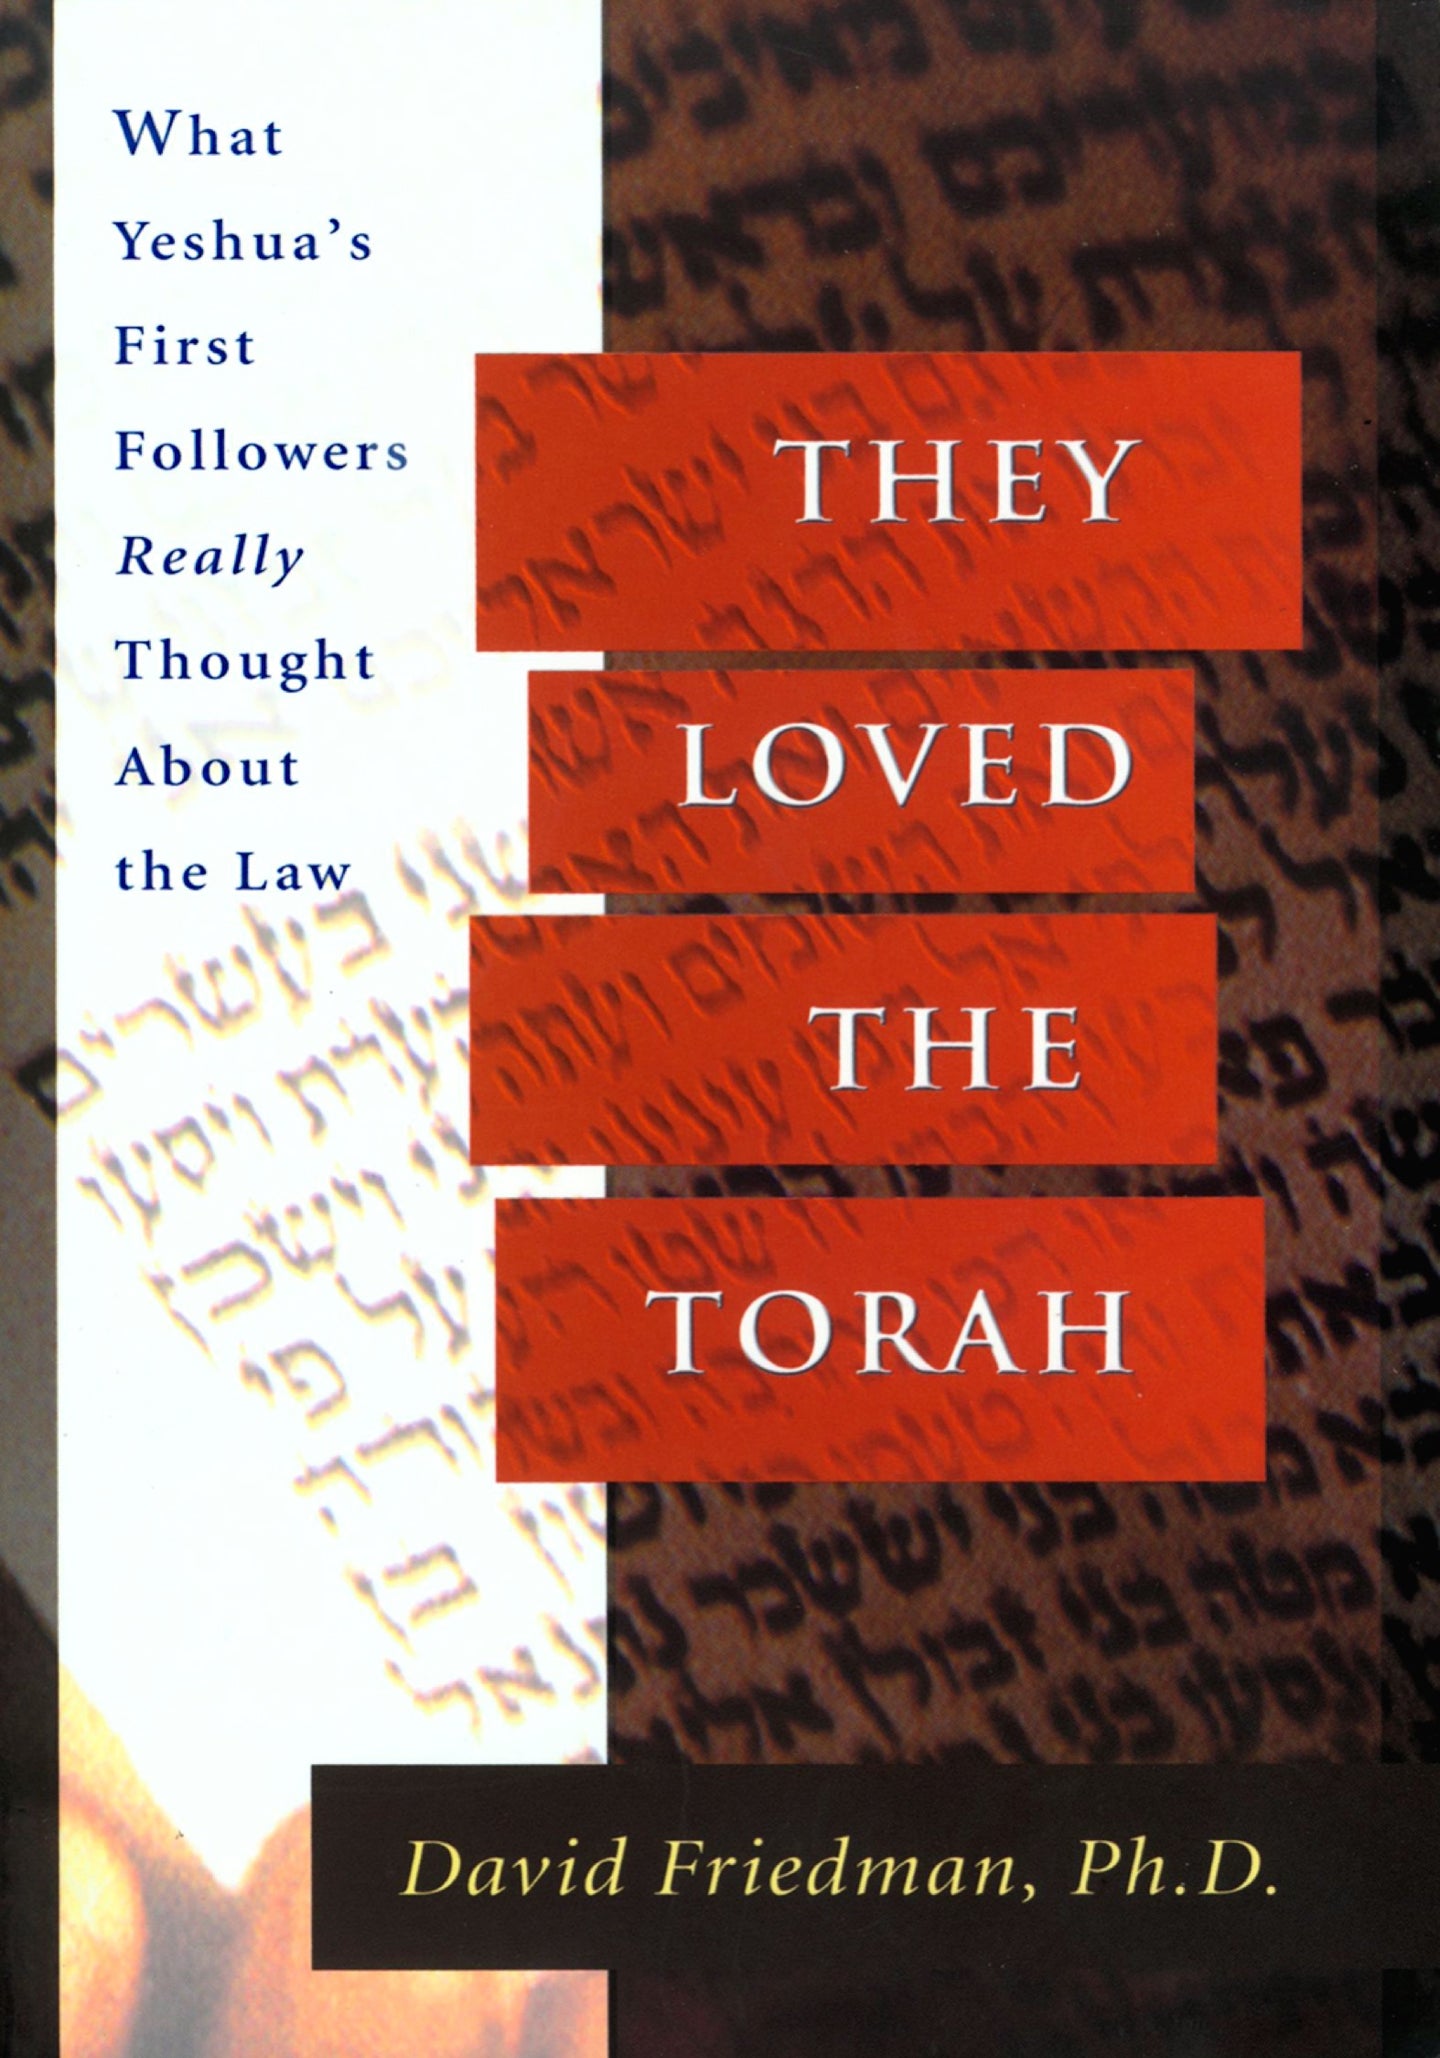 They Loved the Torah: What Yeshua's First Followers Really Thought about the Law by David Friedman, PhD